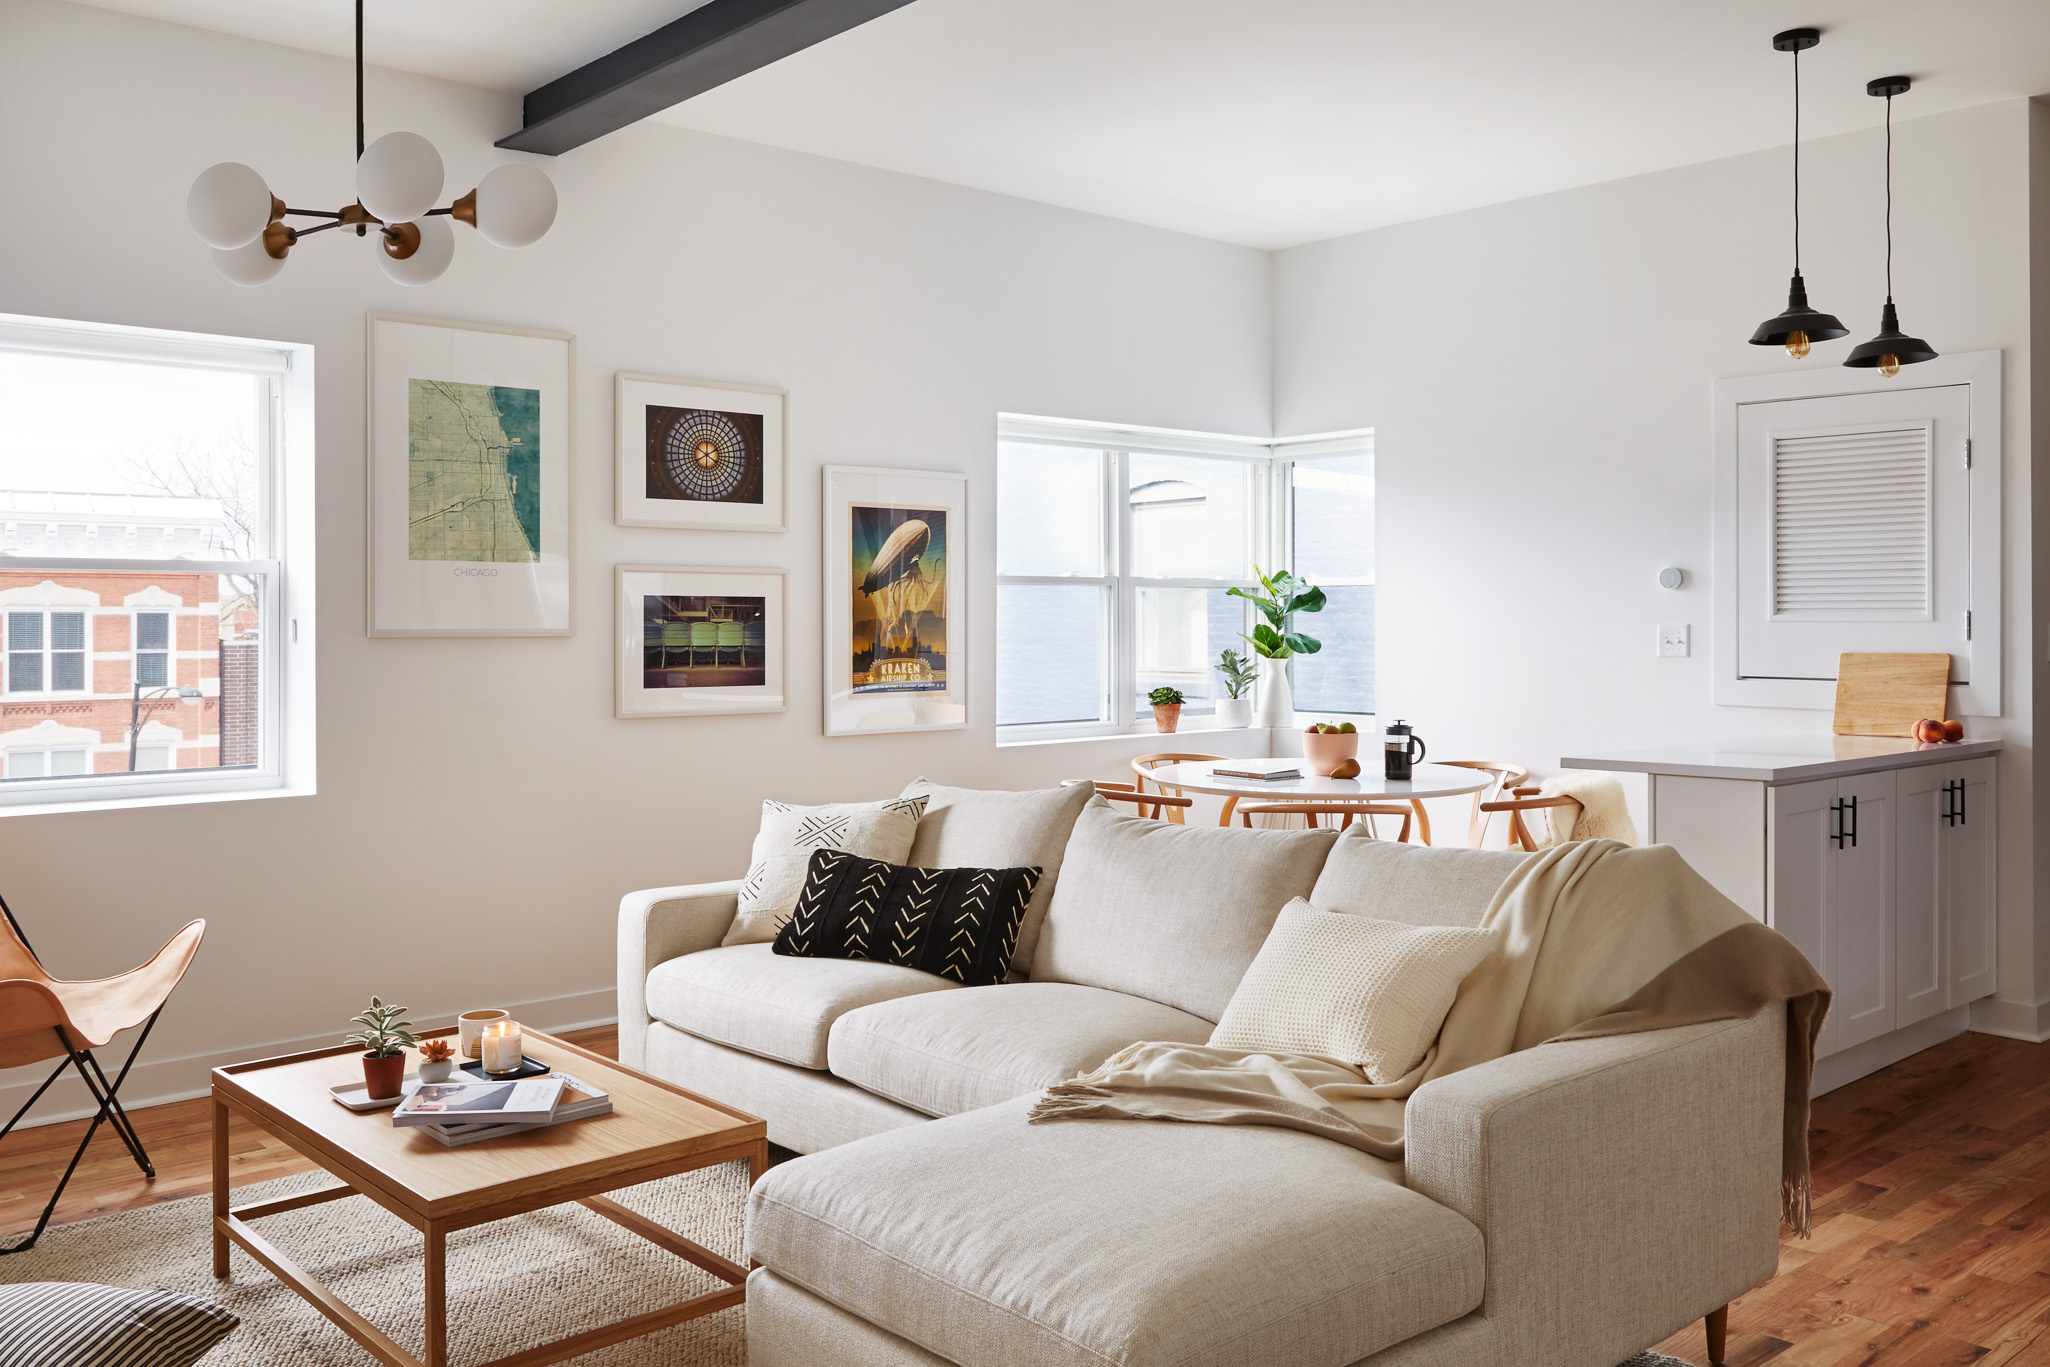 Adult dorms: Why young professionals and investors are embracing co-living